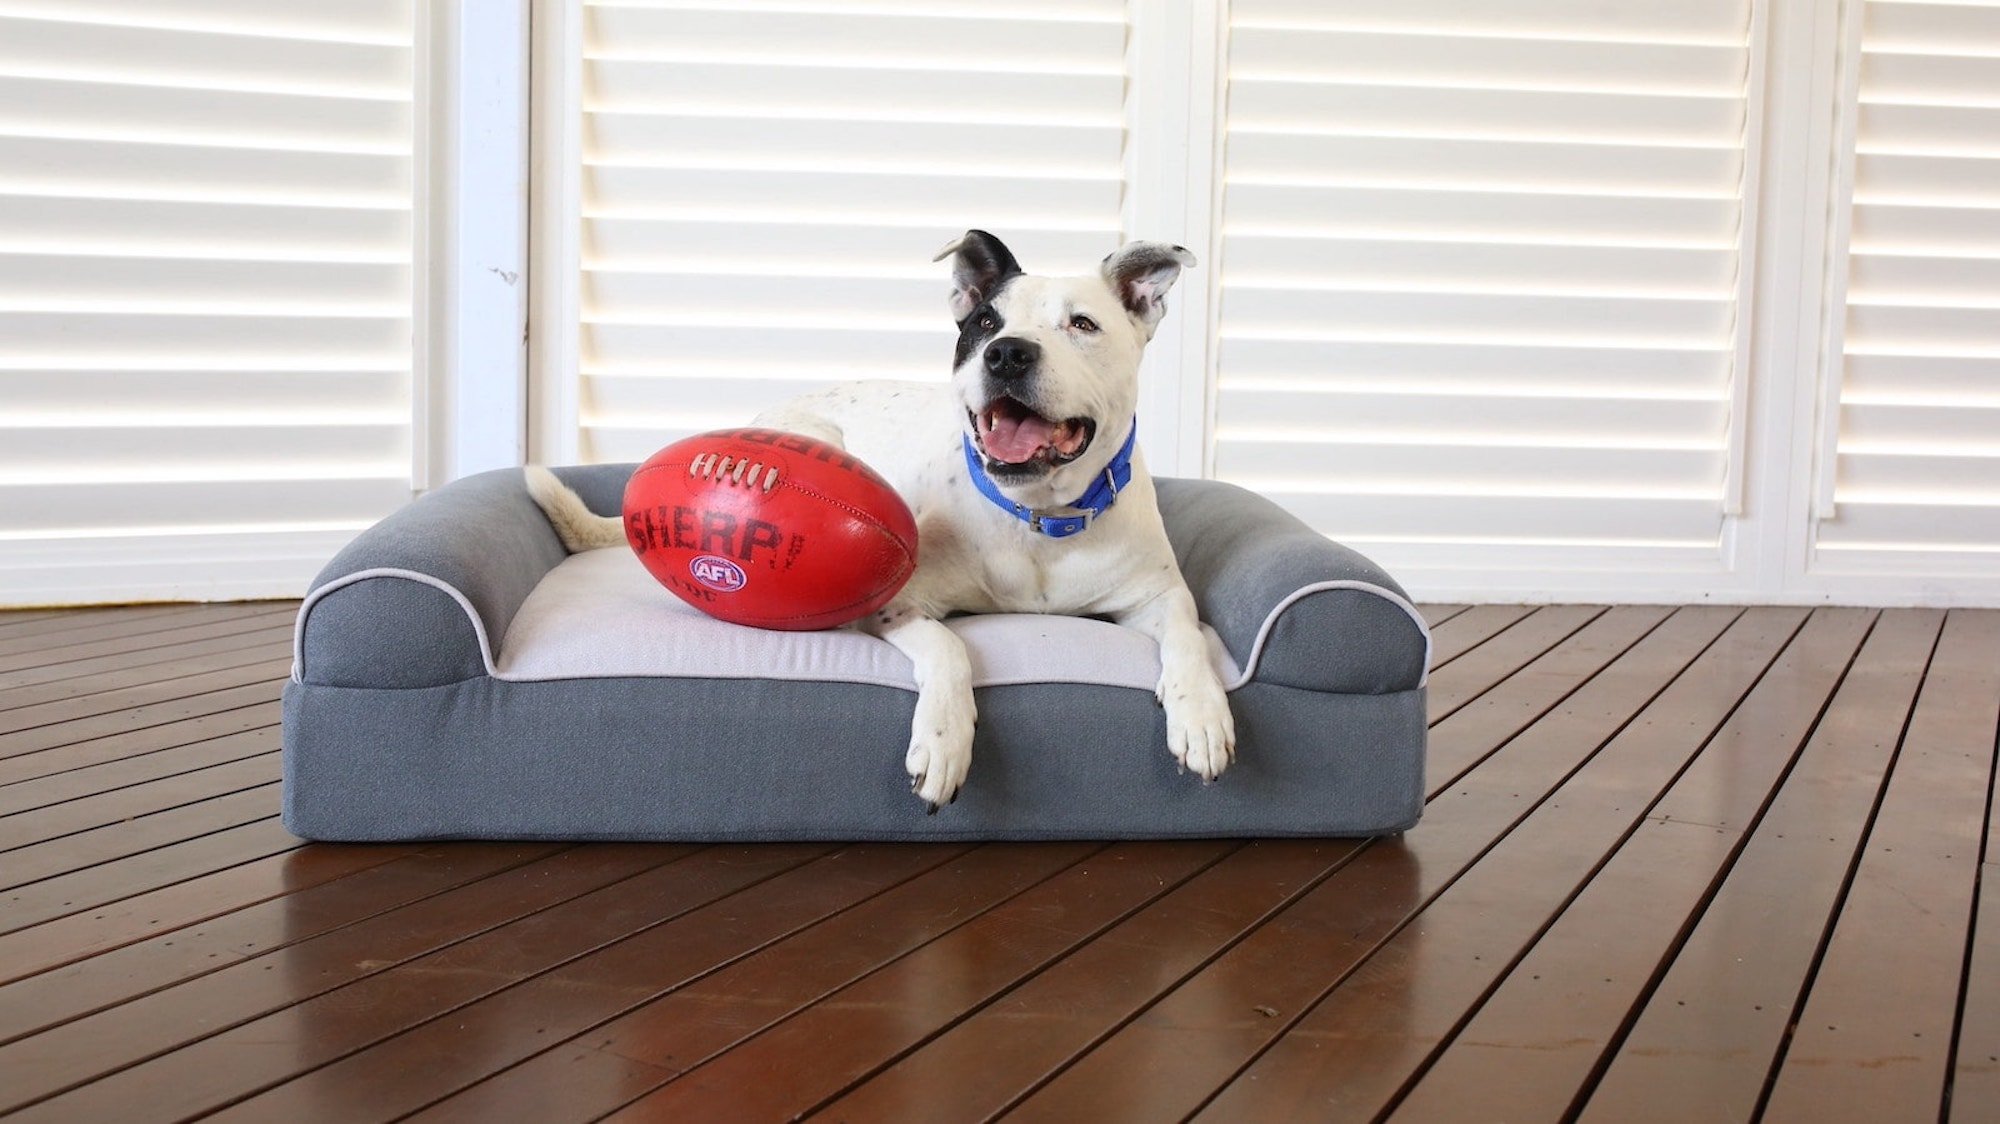 This dog bed helps improve your older dog’s quality of life